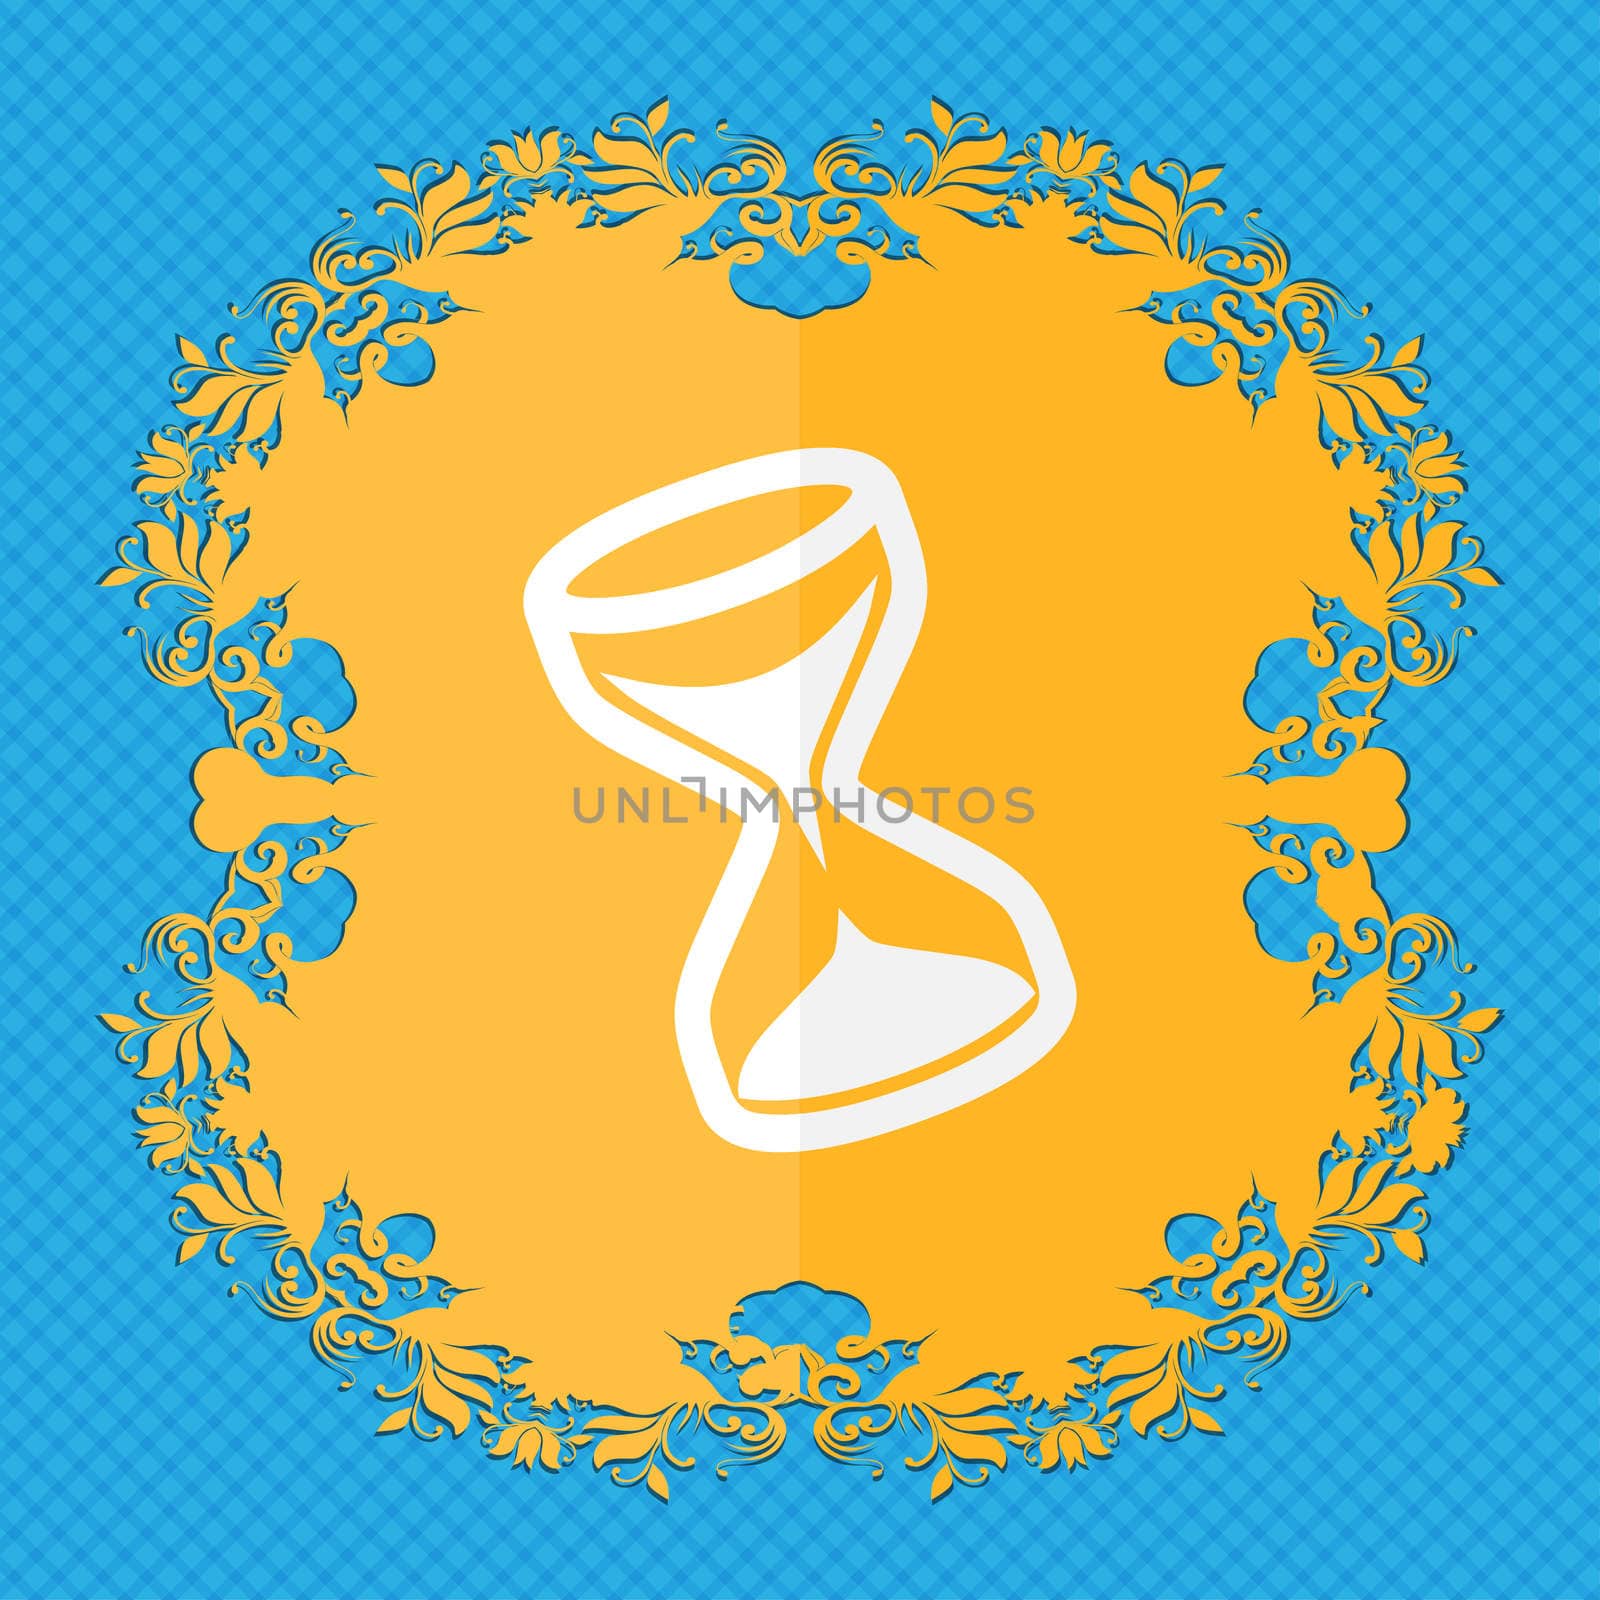 hourglass. Floral flat design on a blue abstract background with place for your text. illustration